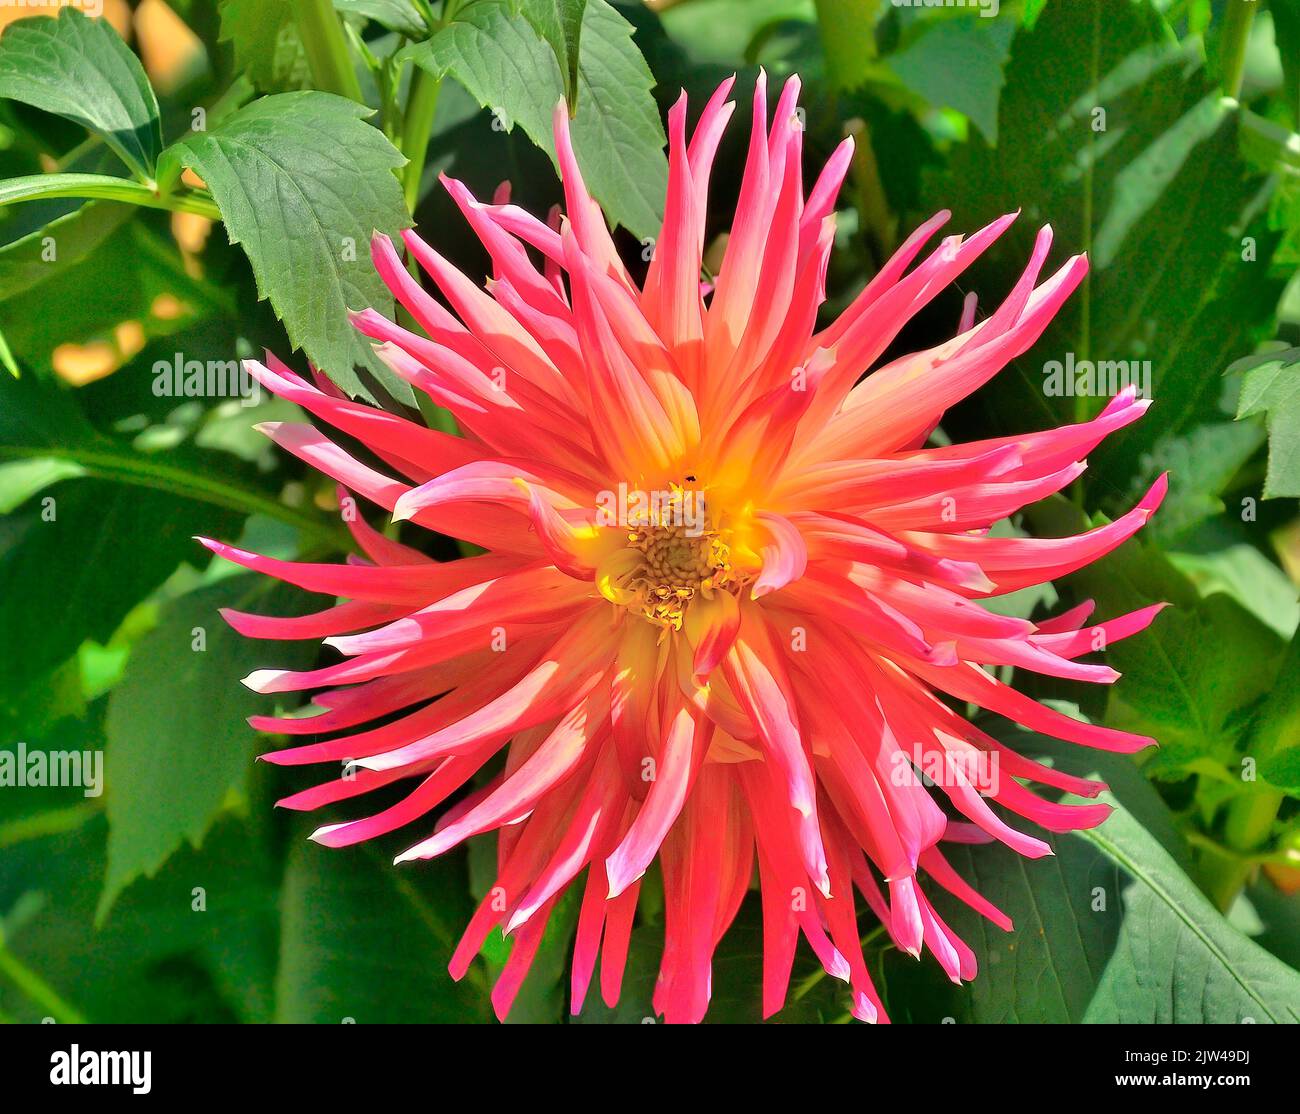 Dahlia cactus variety Fringed Star in the garden. One of the most unpretentious varieties. Single flower with salmon colored petals and yellow center, Stock Photo